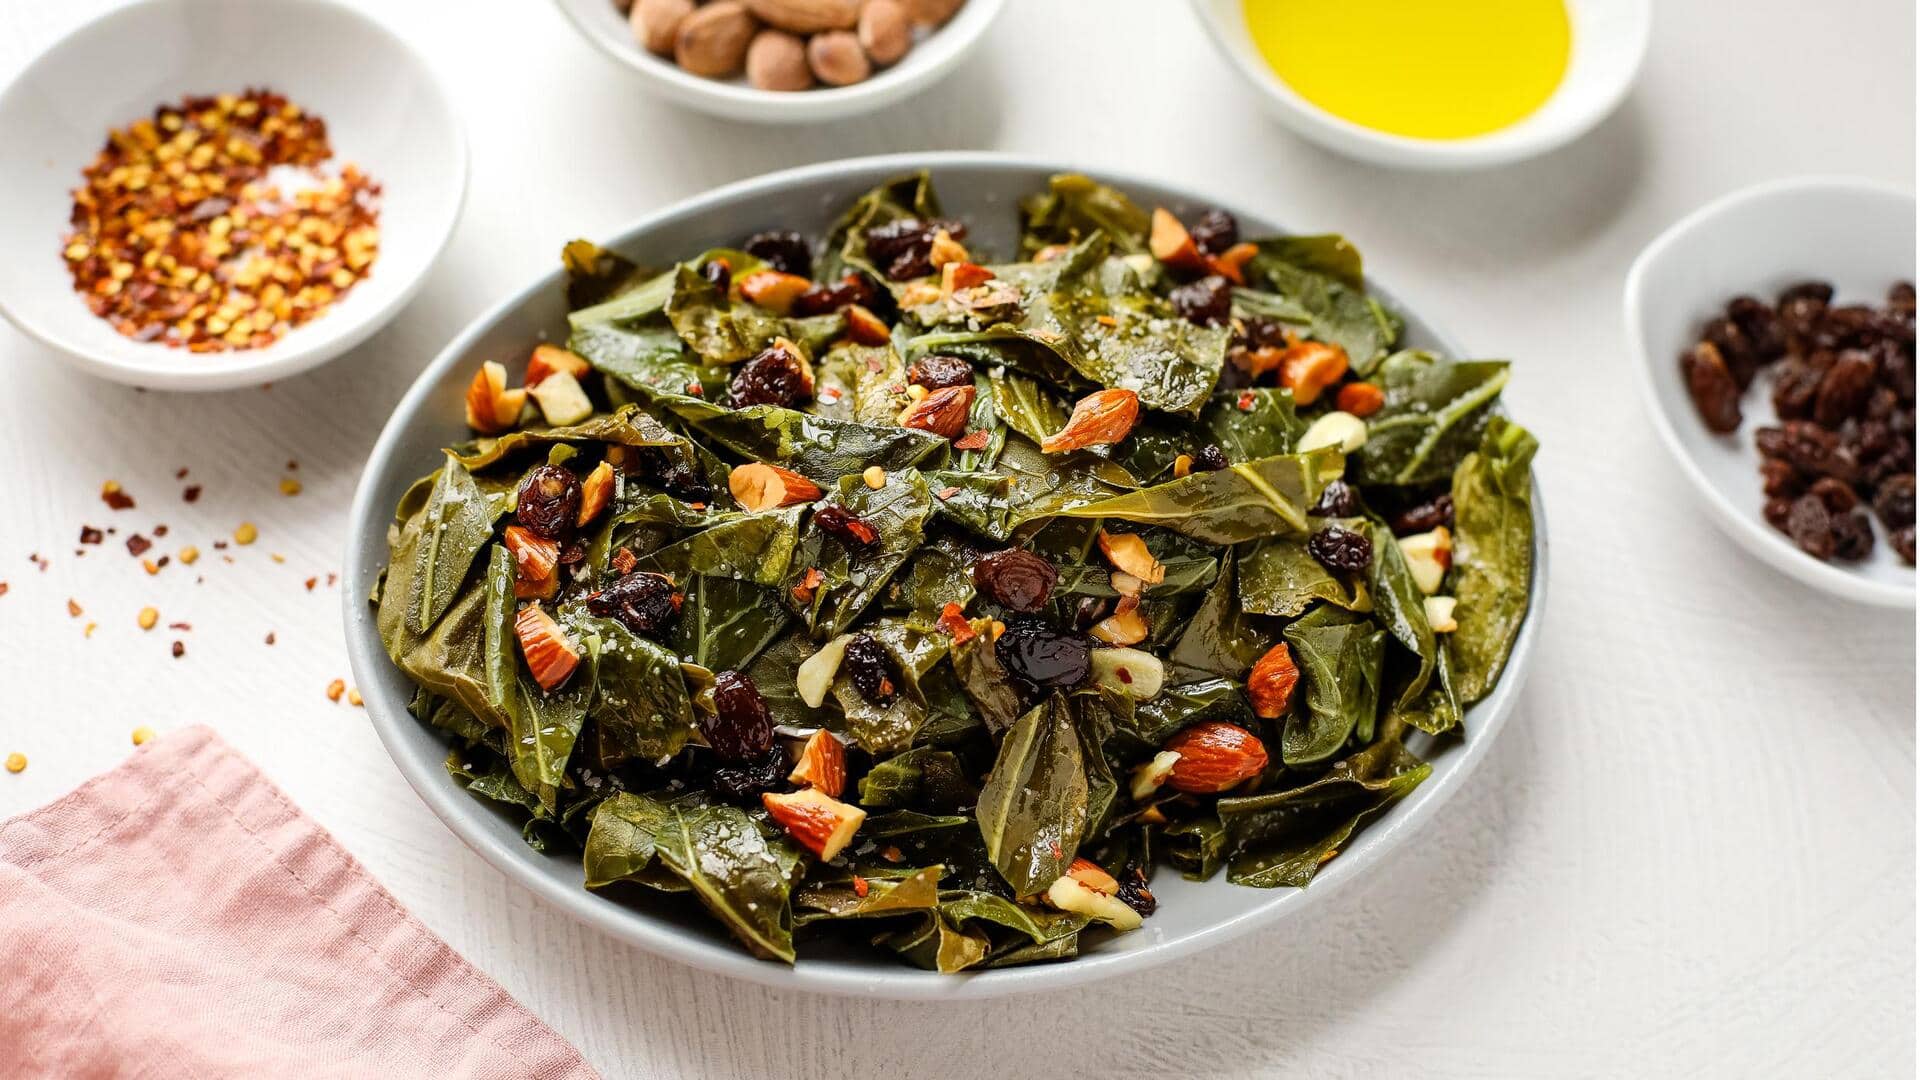 Recipe-o'-clock: Try this collard greens with almonds and raisins dish 